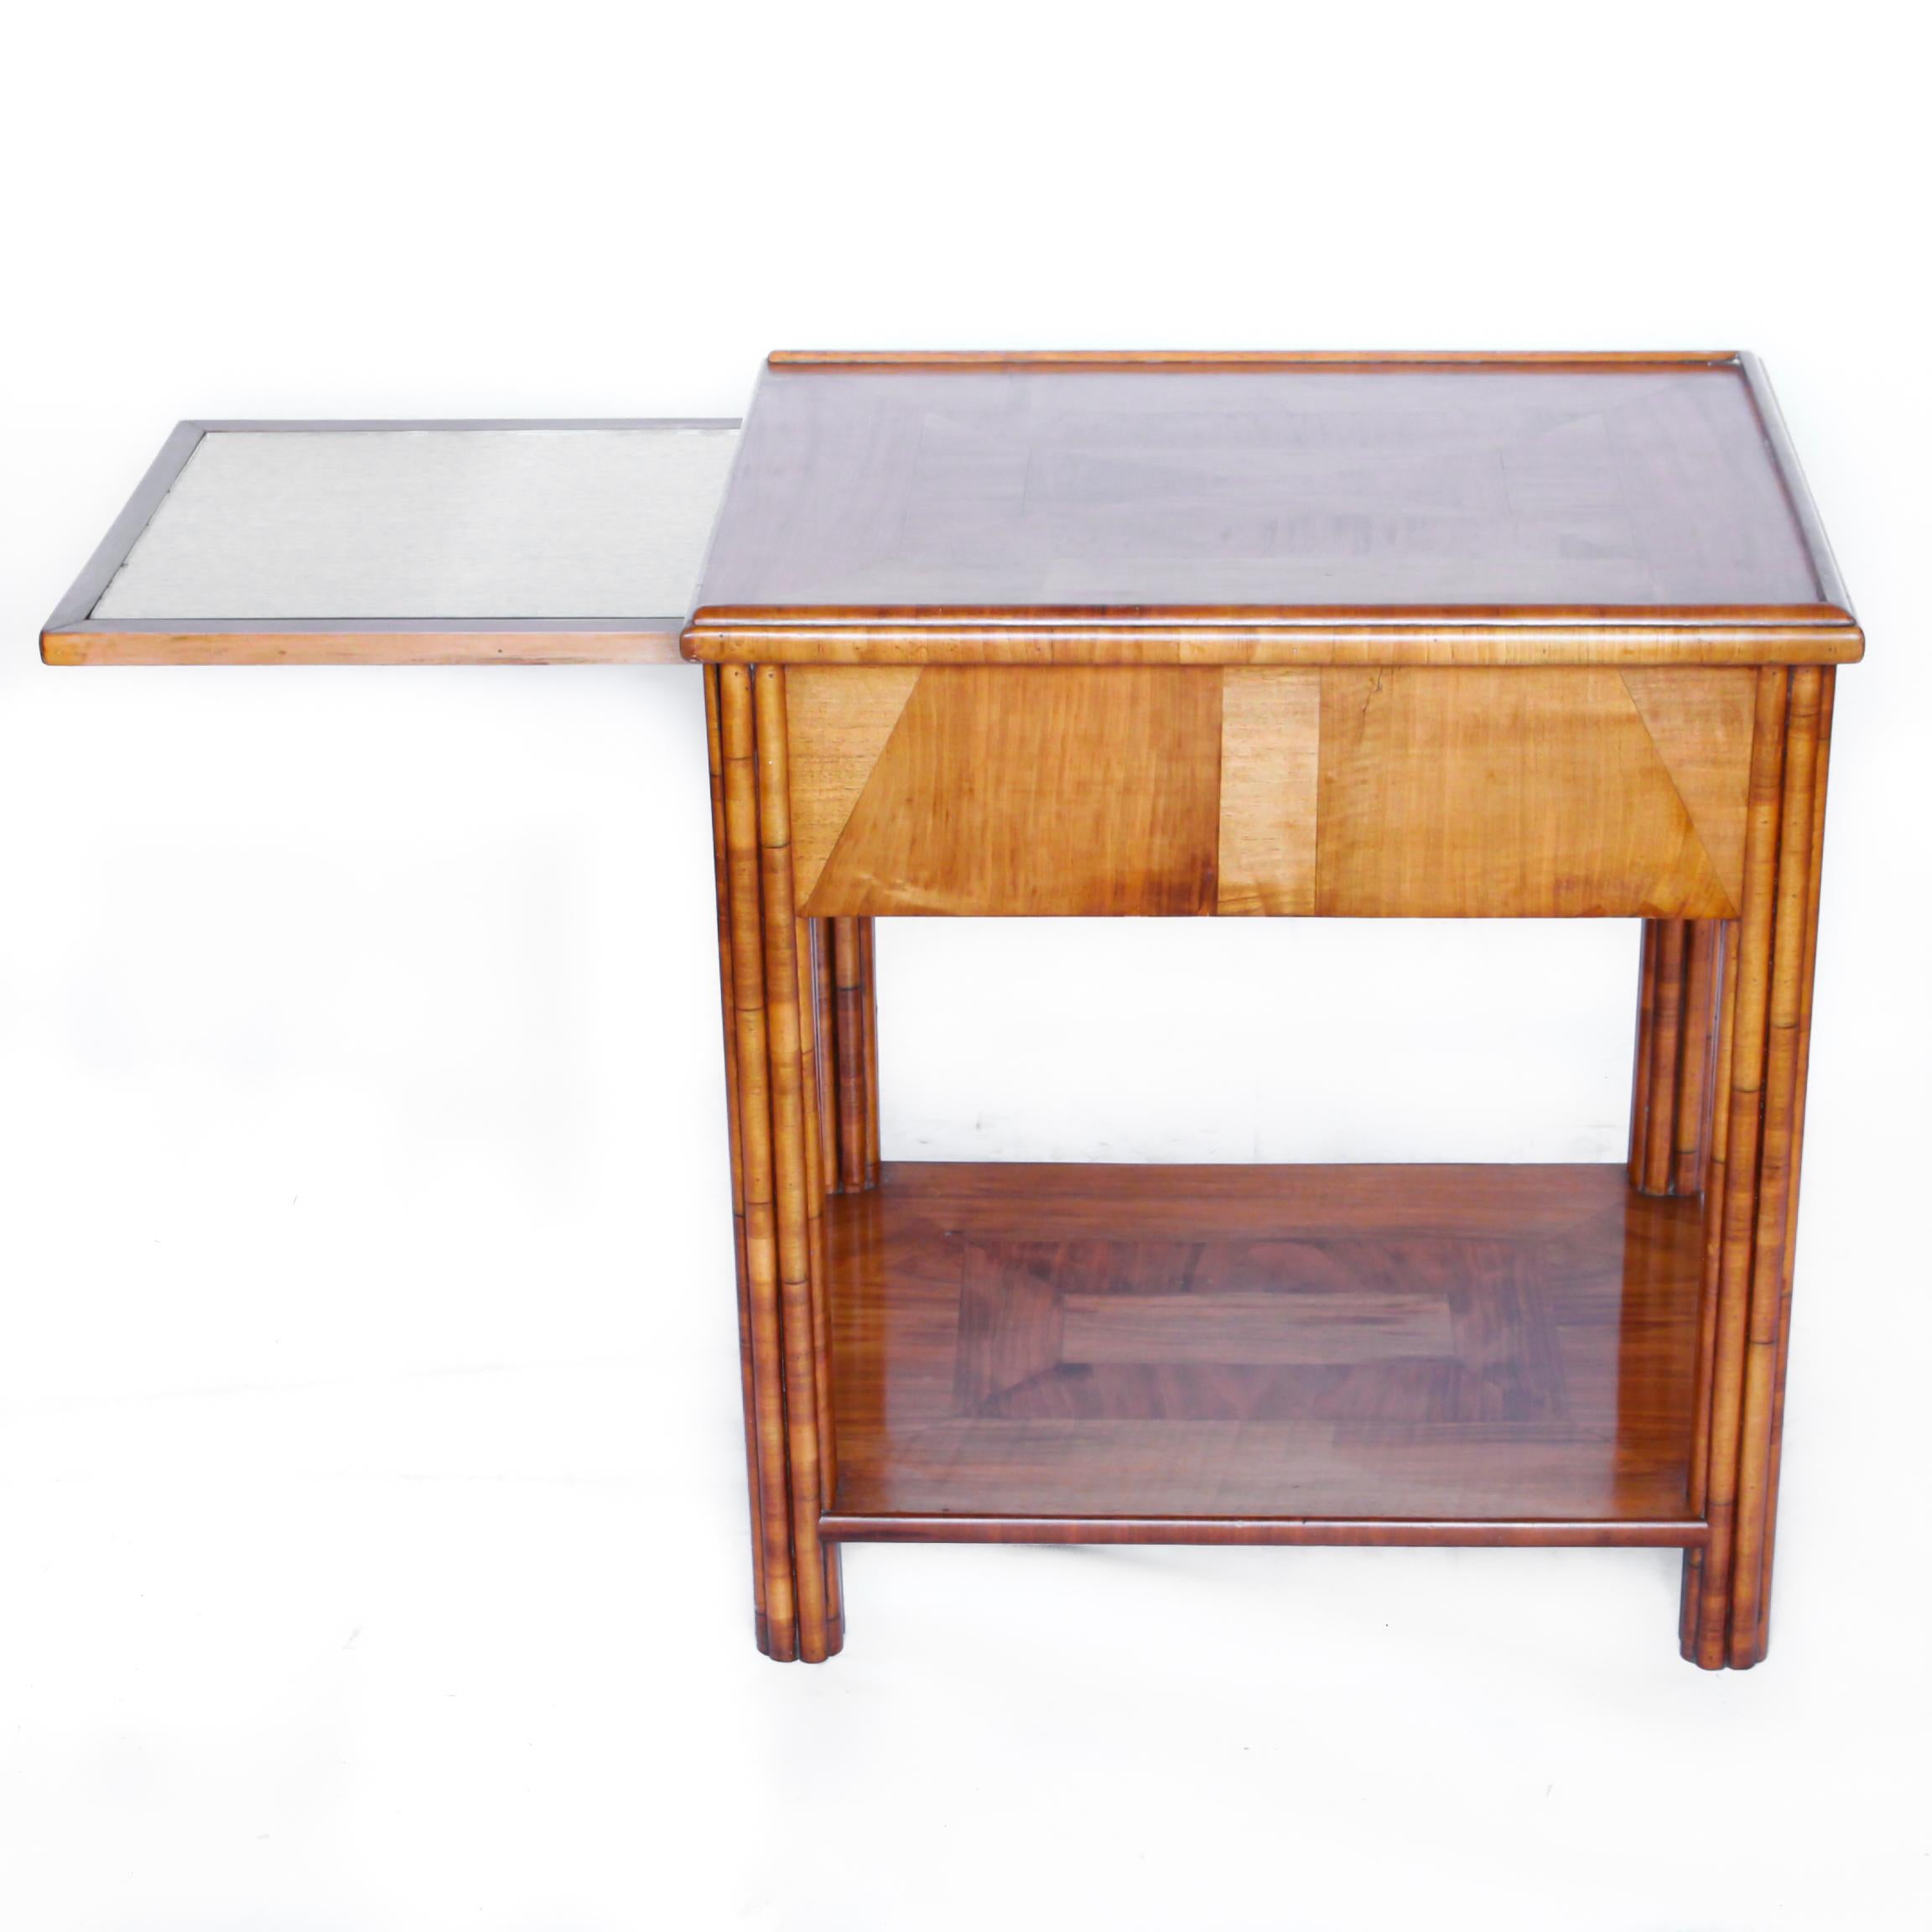 Art Deco Occasional Table Walnut with Sliding Tray and Integral Drawer 1930's 2